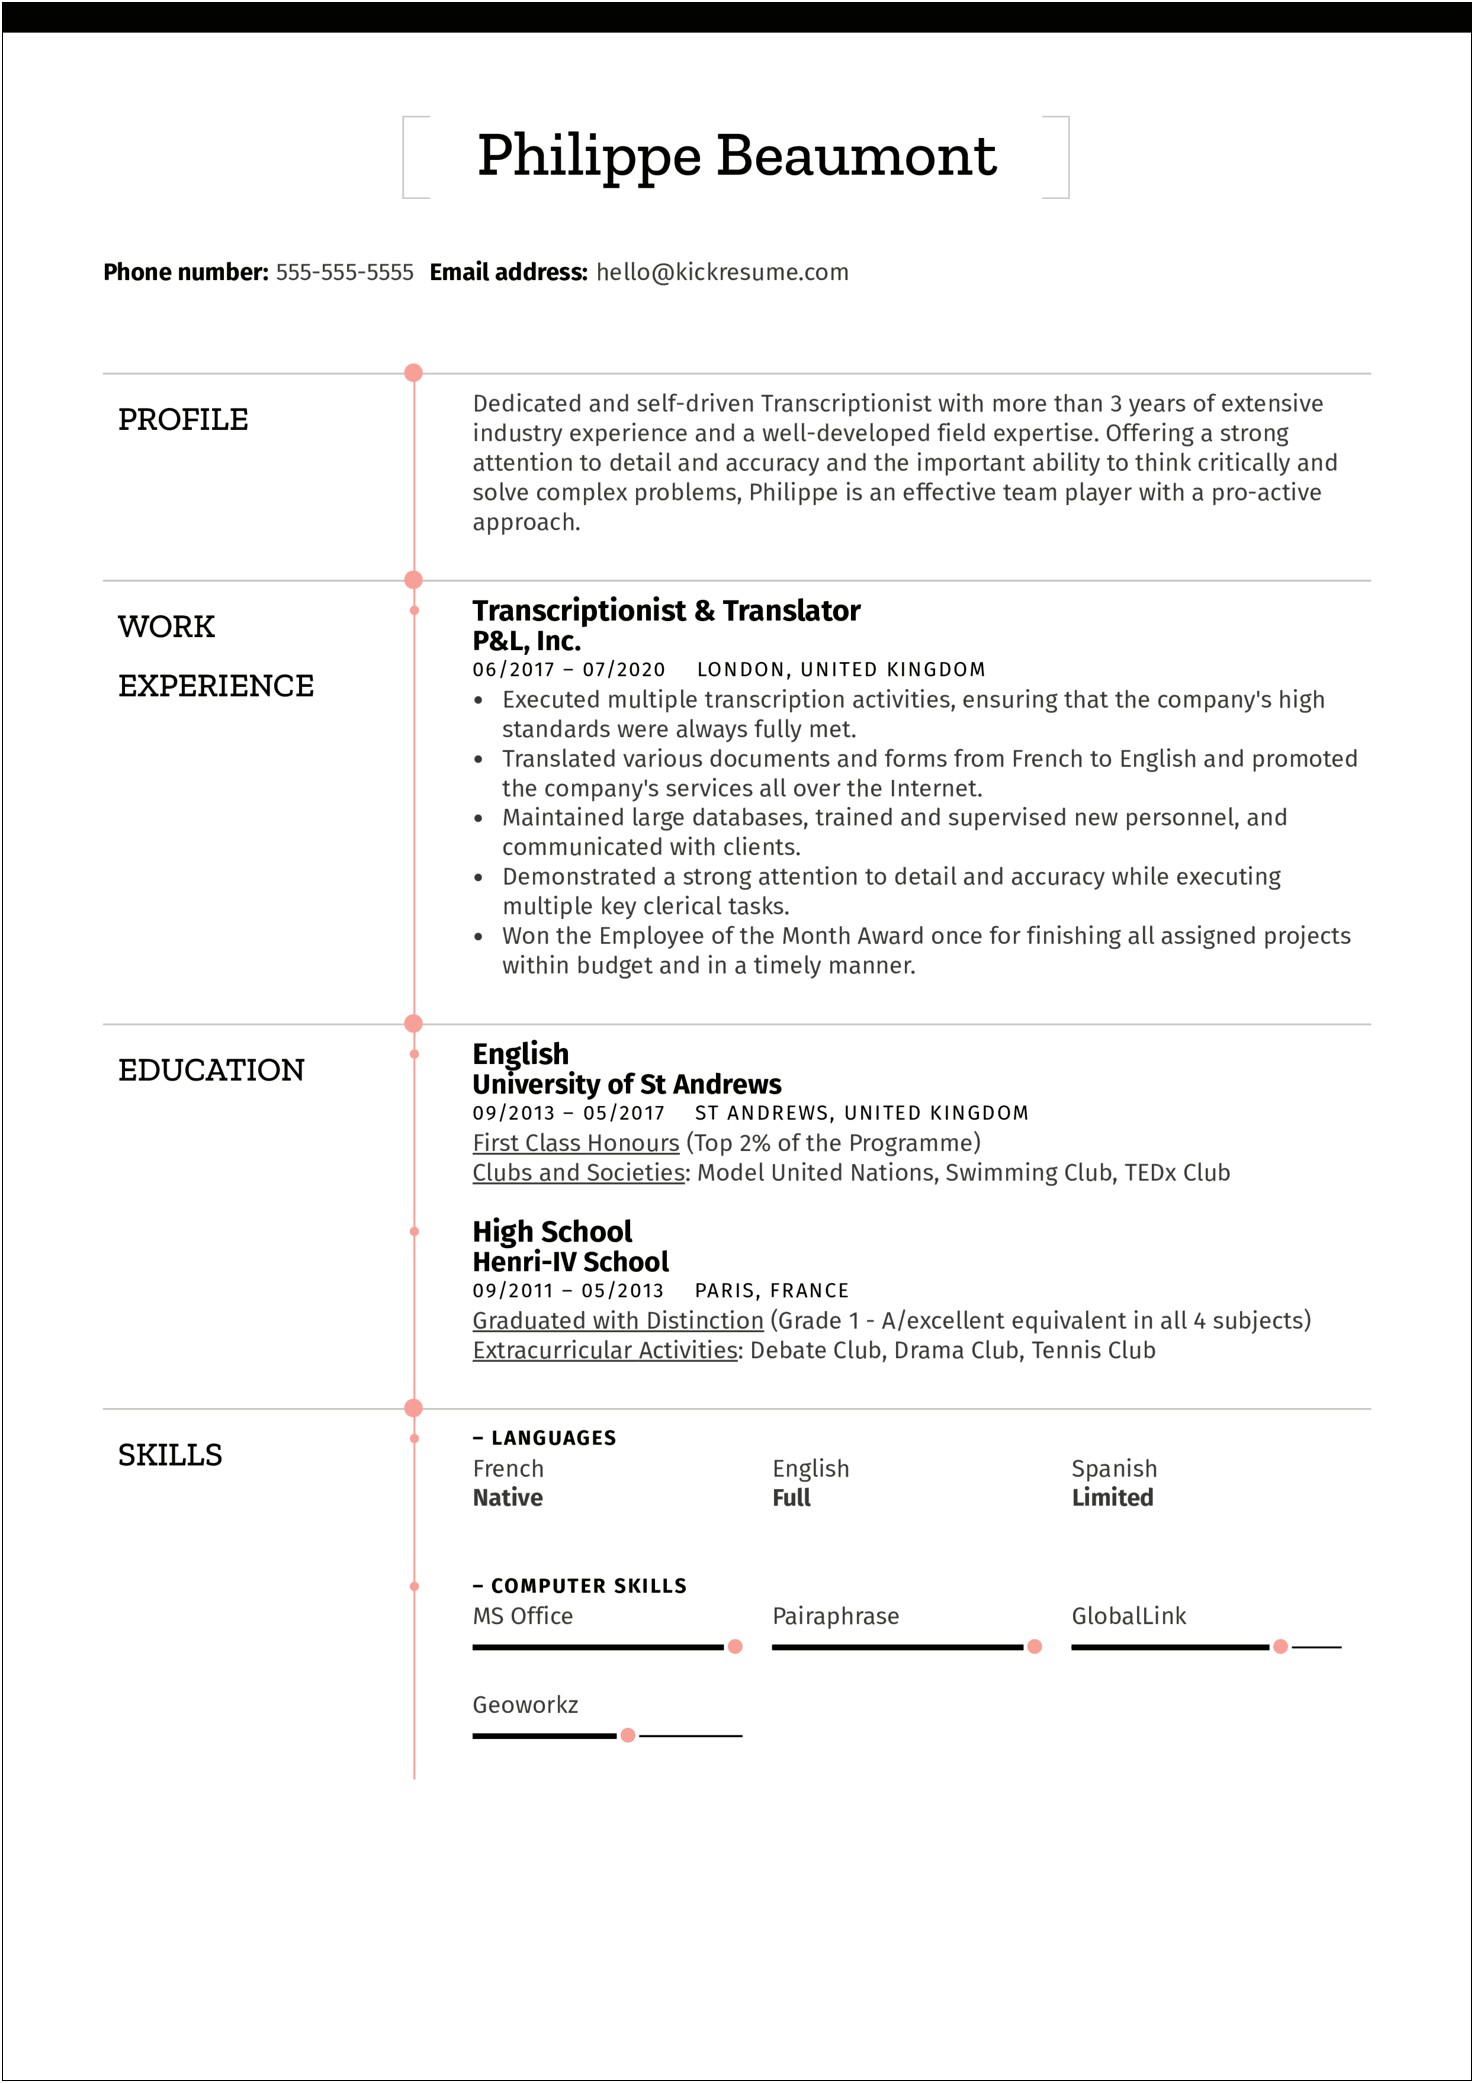 Sample Of Resume Skills For Transcriptionist With Experience